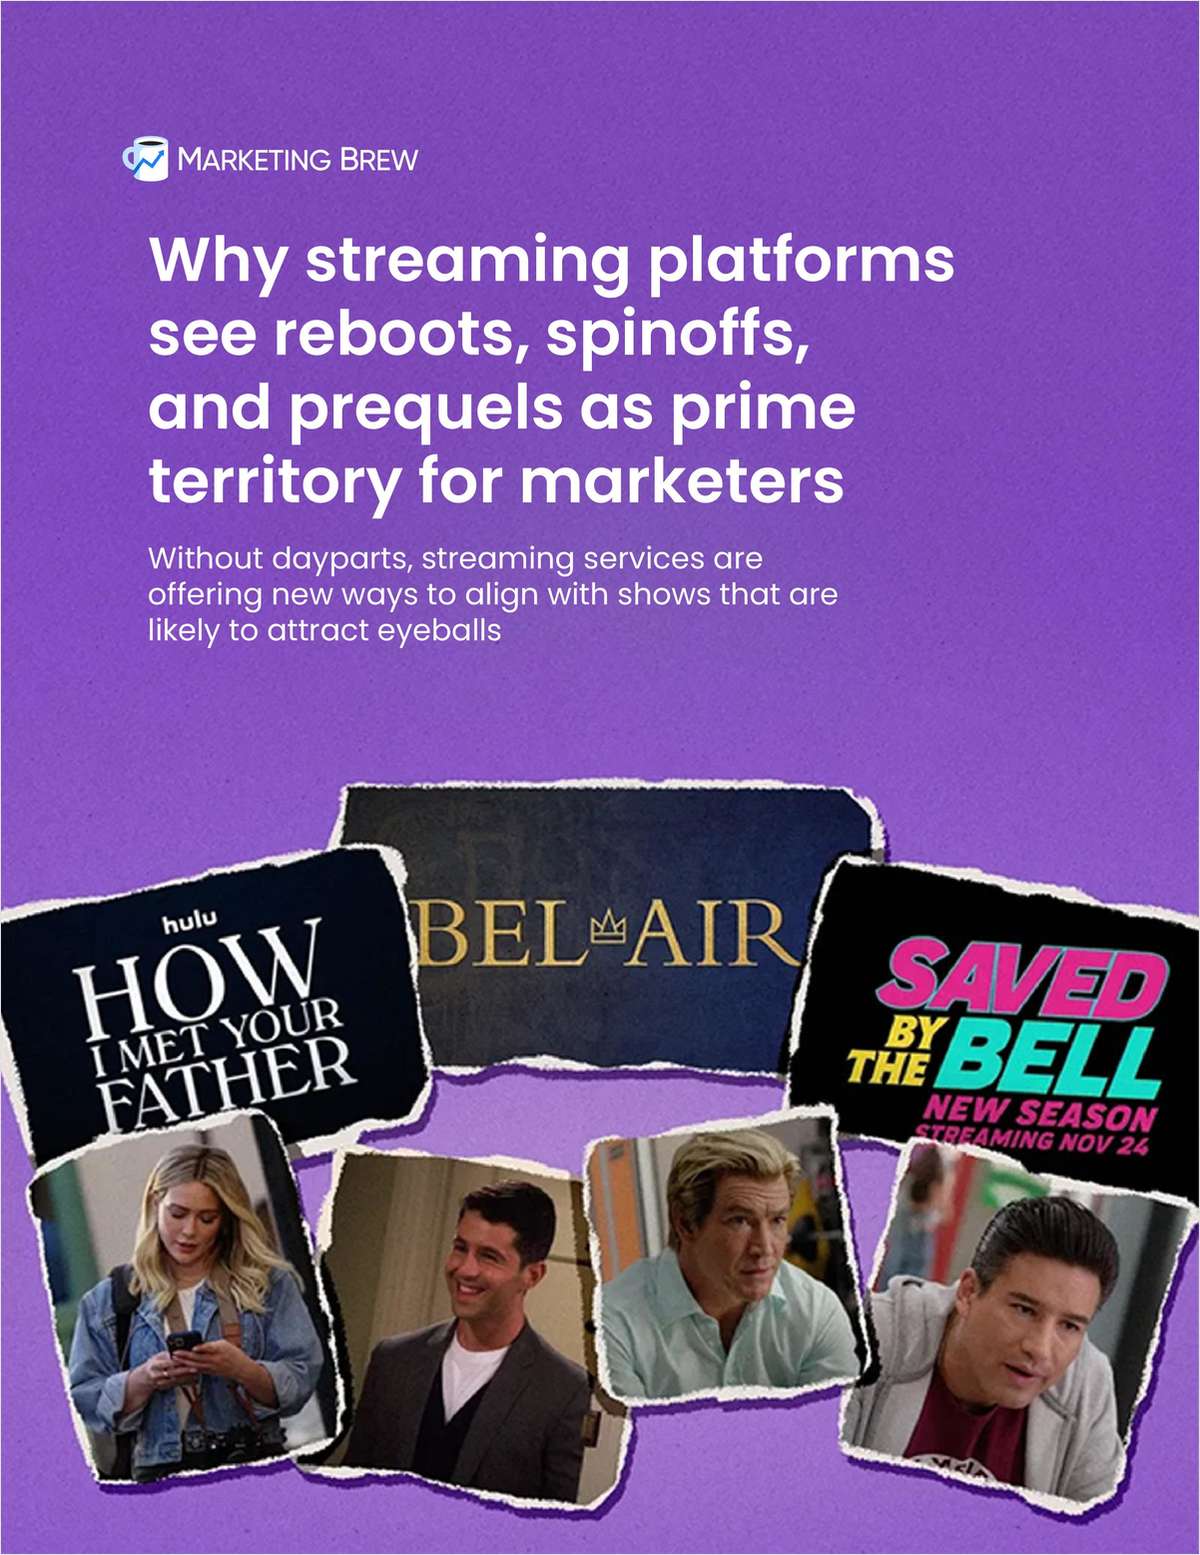 Why streaming platforms see reboots, spinoffs, and prequels as prime territory for marketers